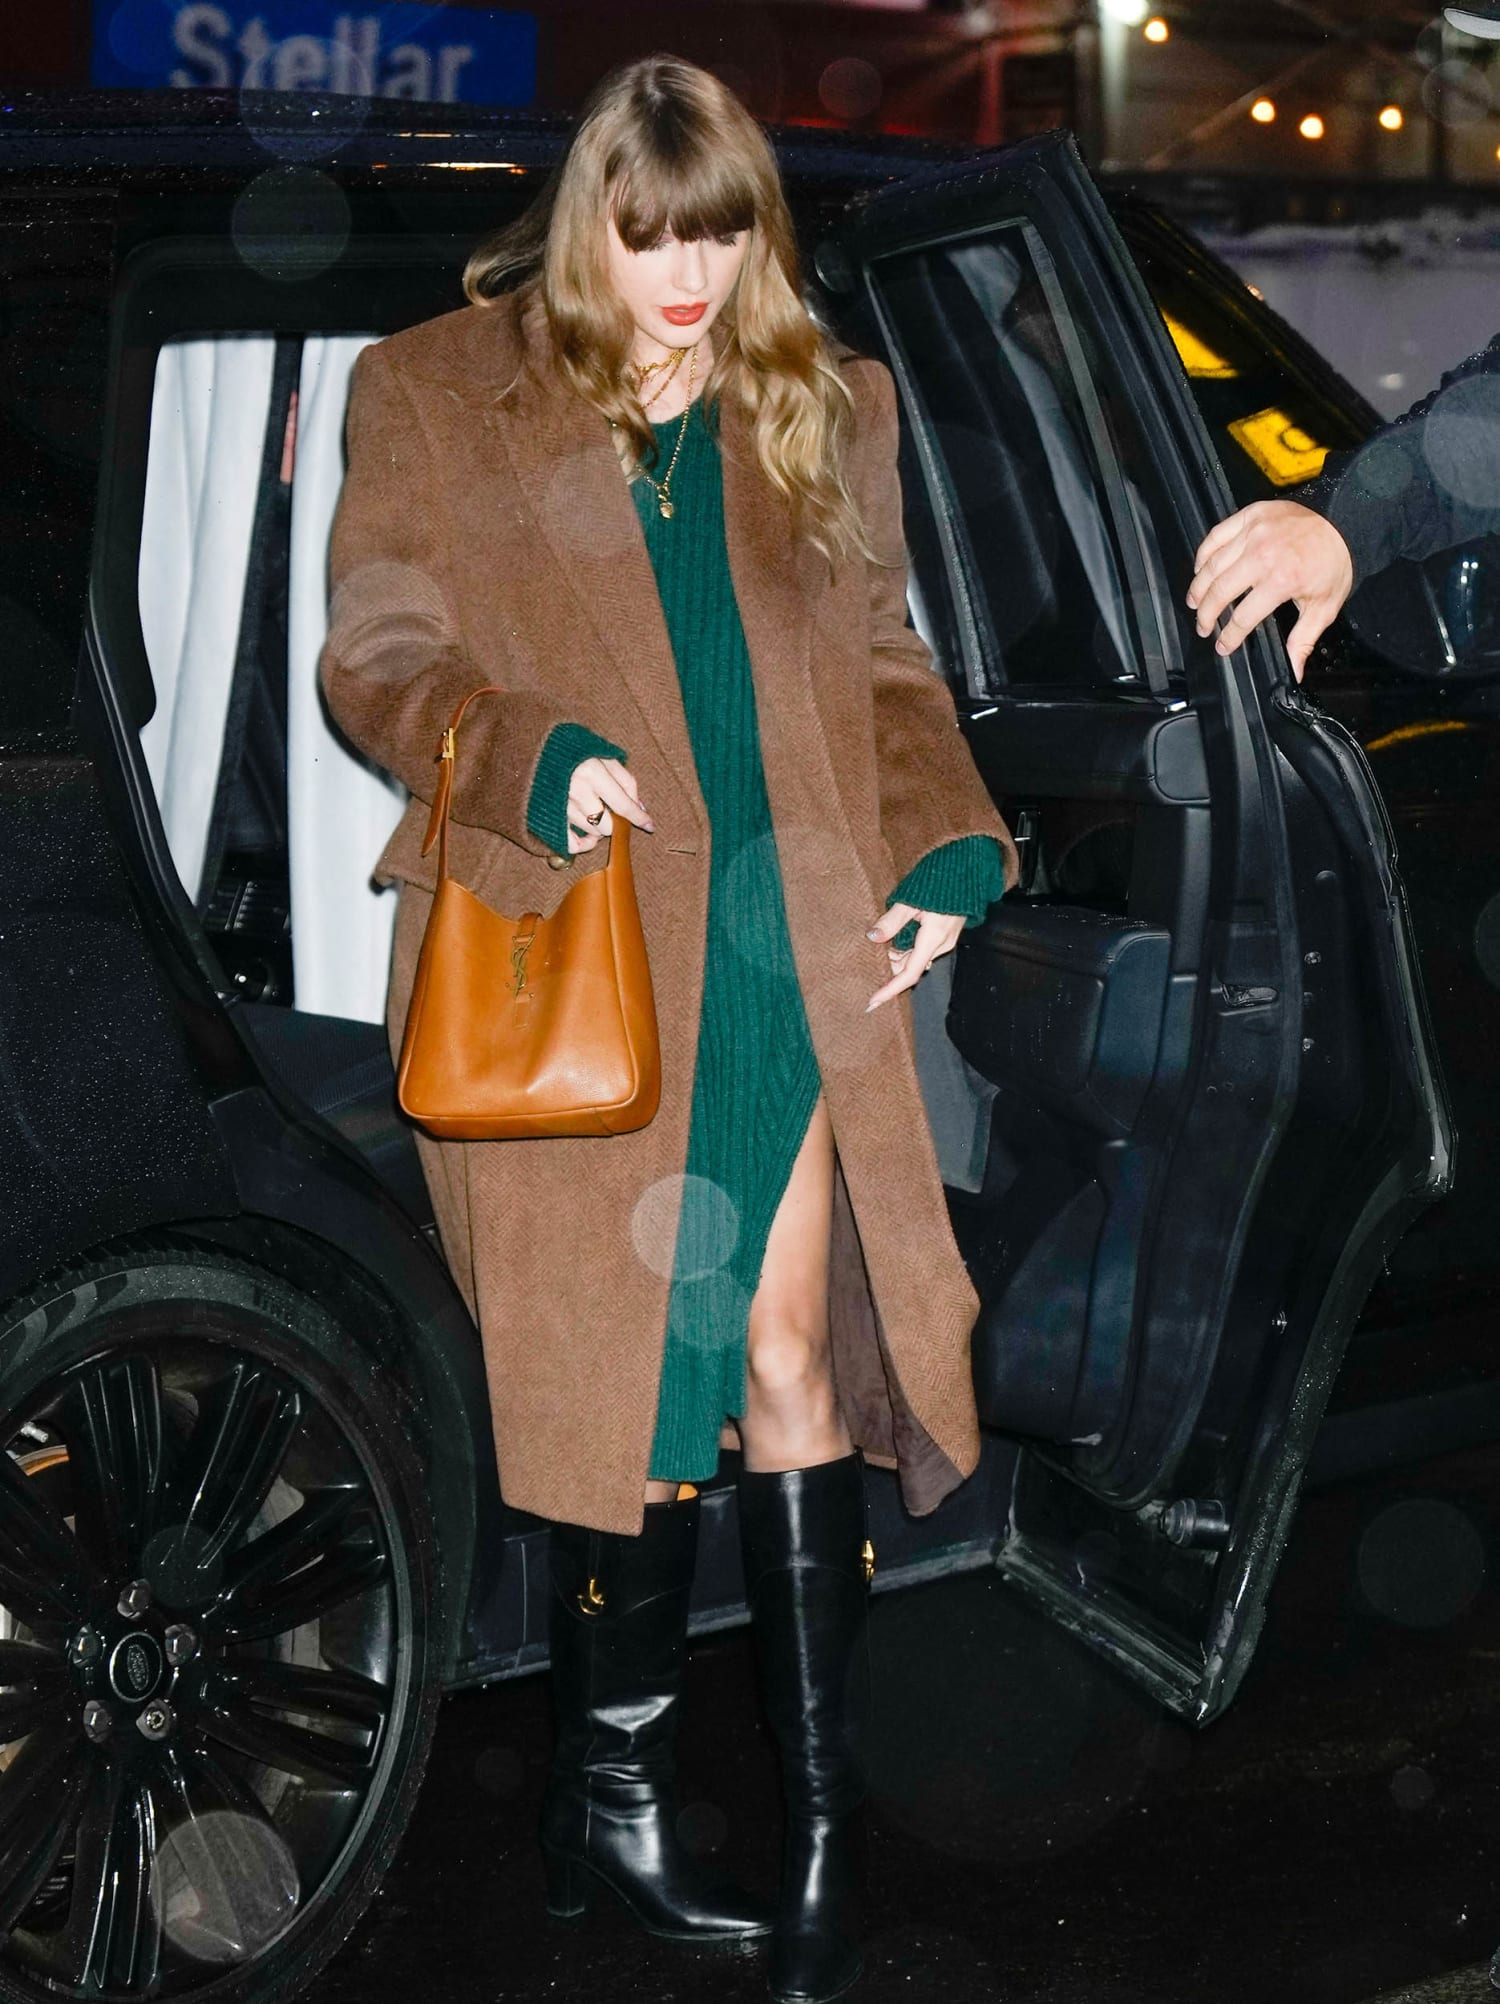 Taylor Swift Is Wearing 'Reputation' Green: Shop Green Clothes Under $55